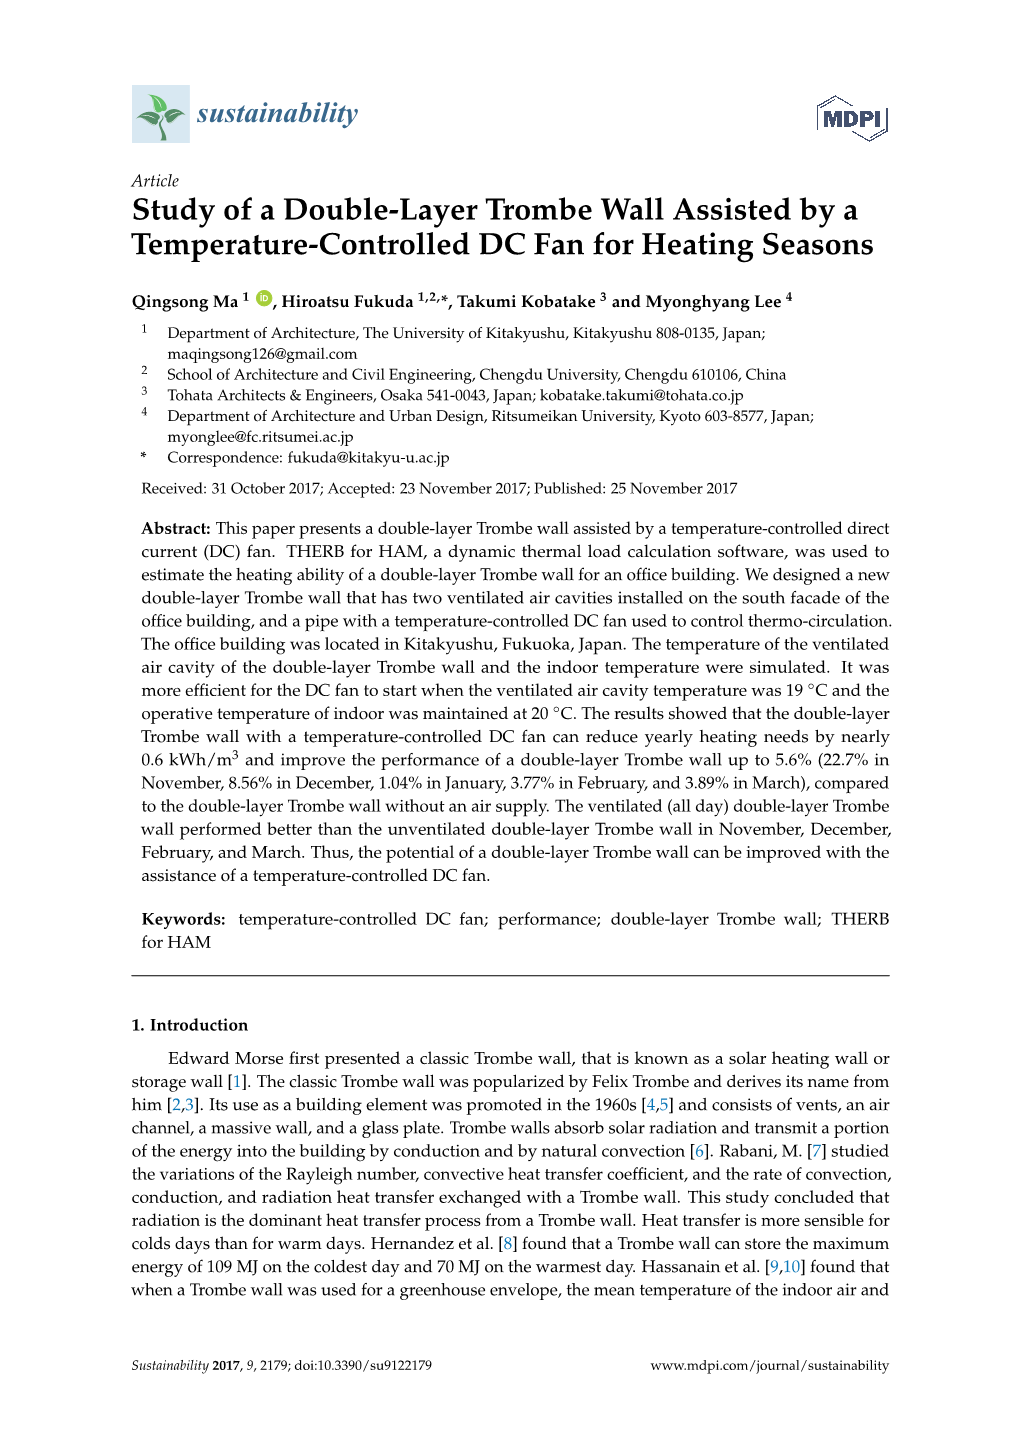 Study of a Double-Layer Trombe Wall Assisted by a Temperature-Controlled DC Fan for Heating Seasons